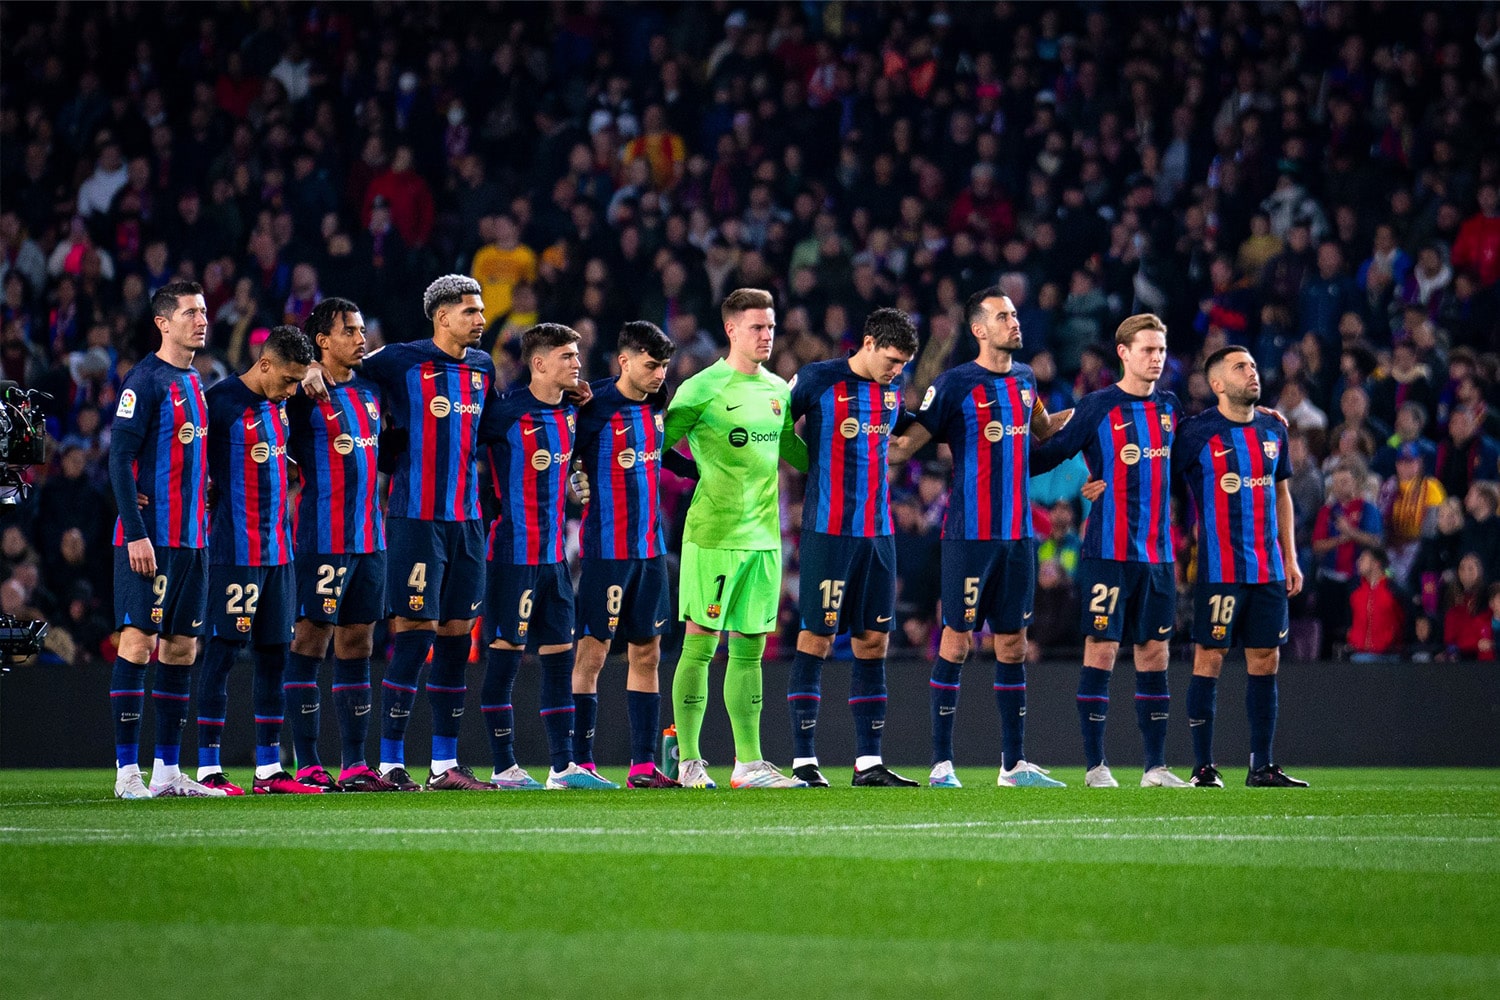 FC Barcelona players stand together on the field before a La Liga match.